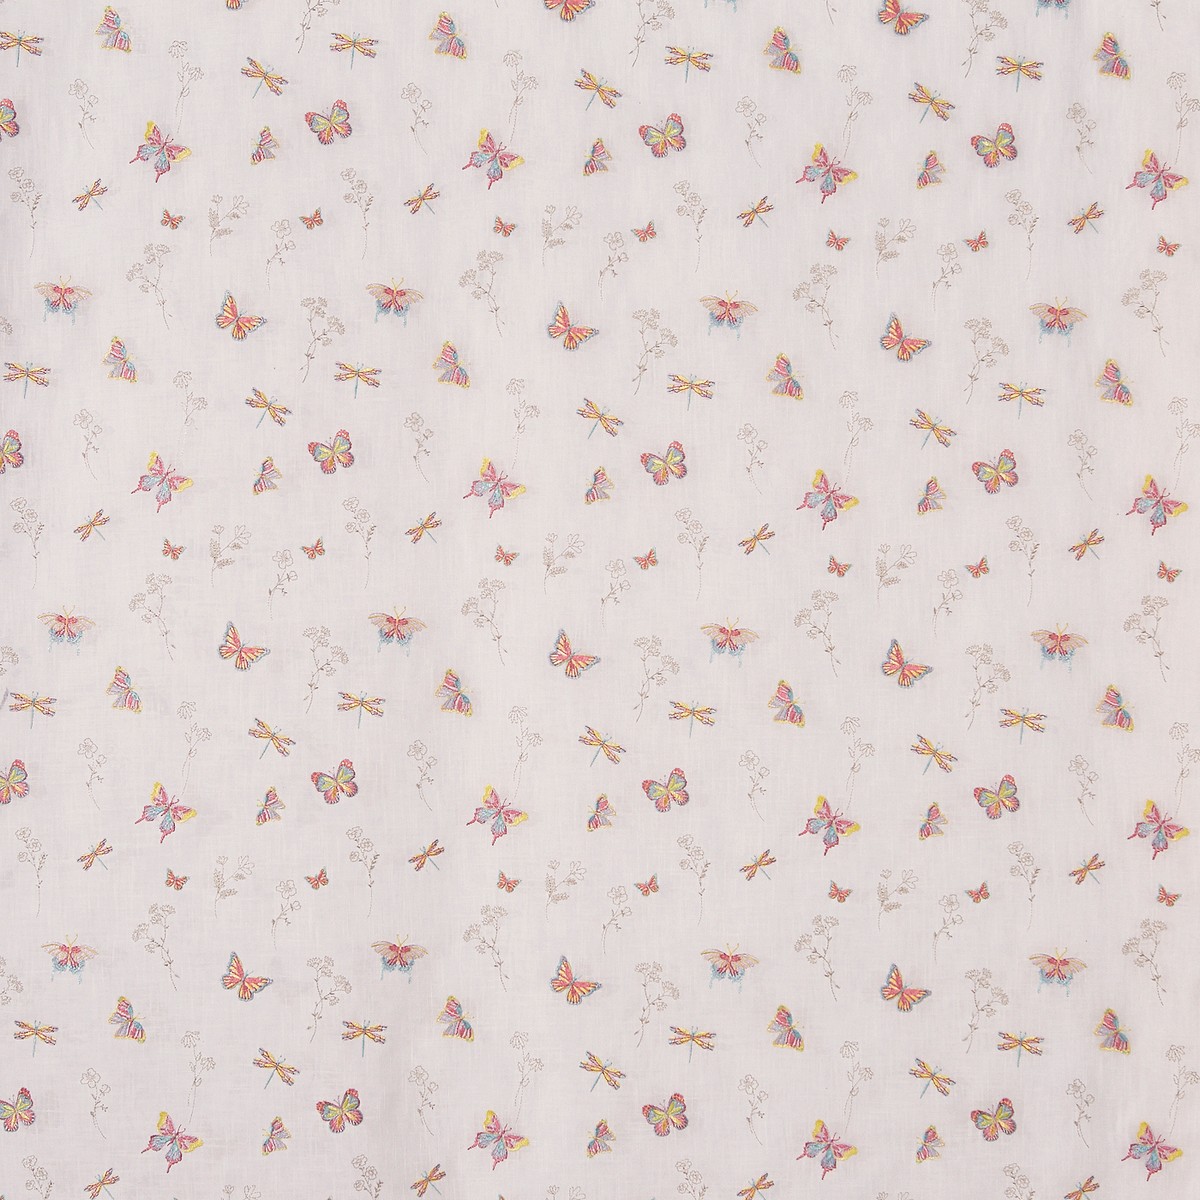 Flutterby Candyfloss Fabric by Prestigious Textiles